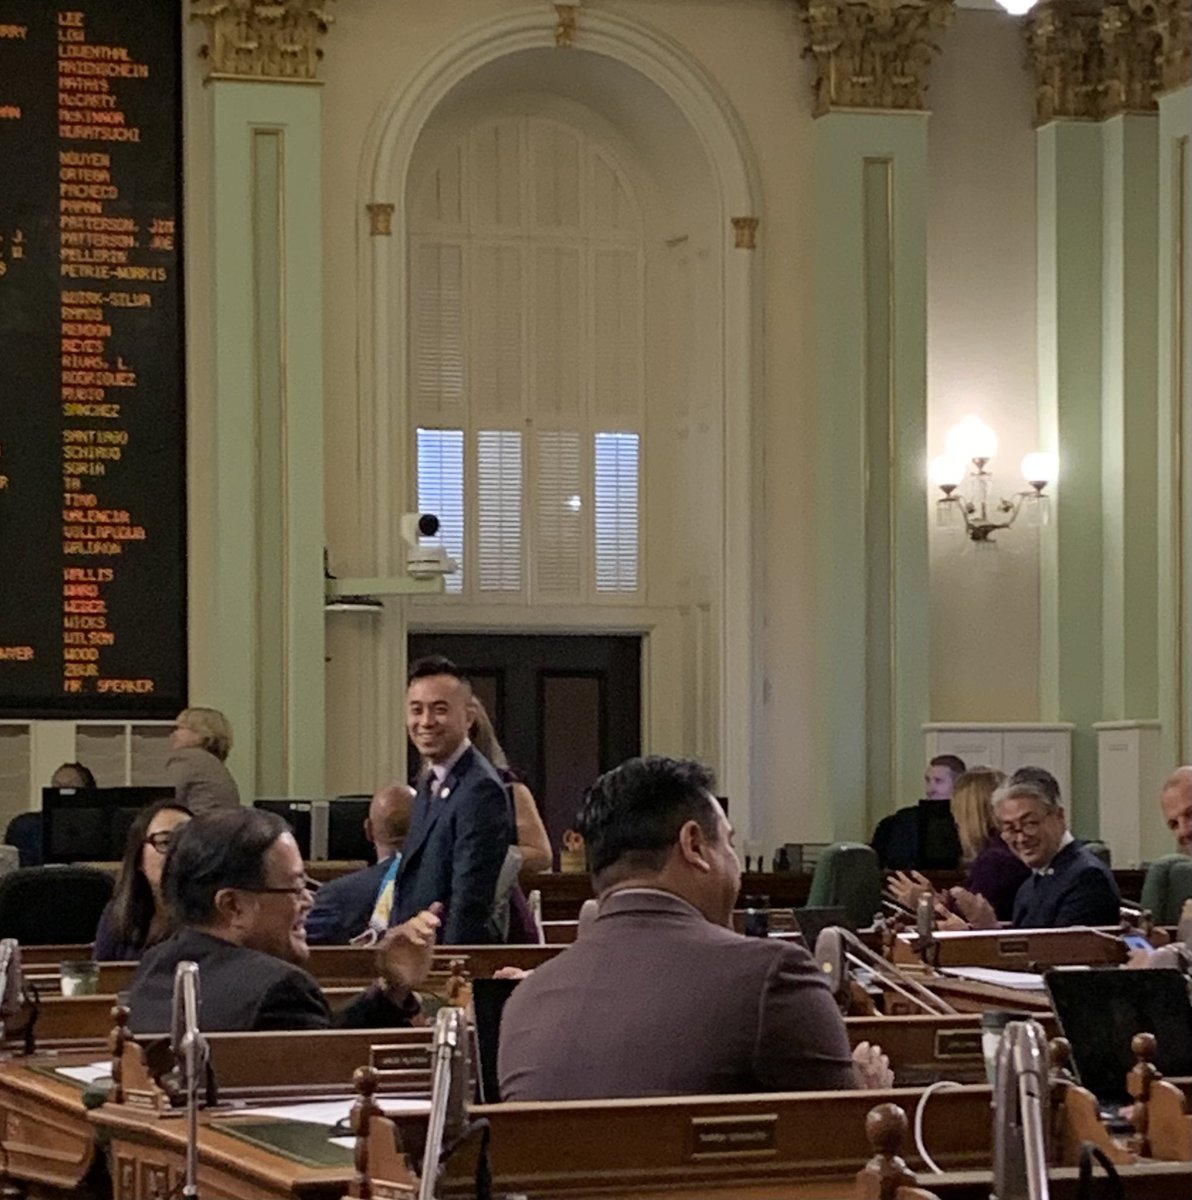 For the first time since the 1950s, light is now shining through the east Assembly Chamber window. For nearly 70 years, the window had been walled off as part of the #CALeg Annex.